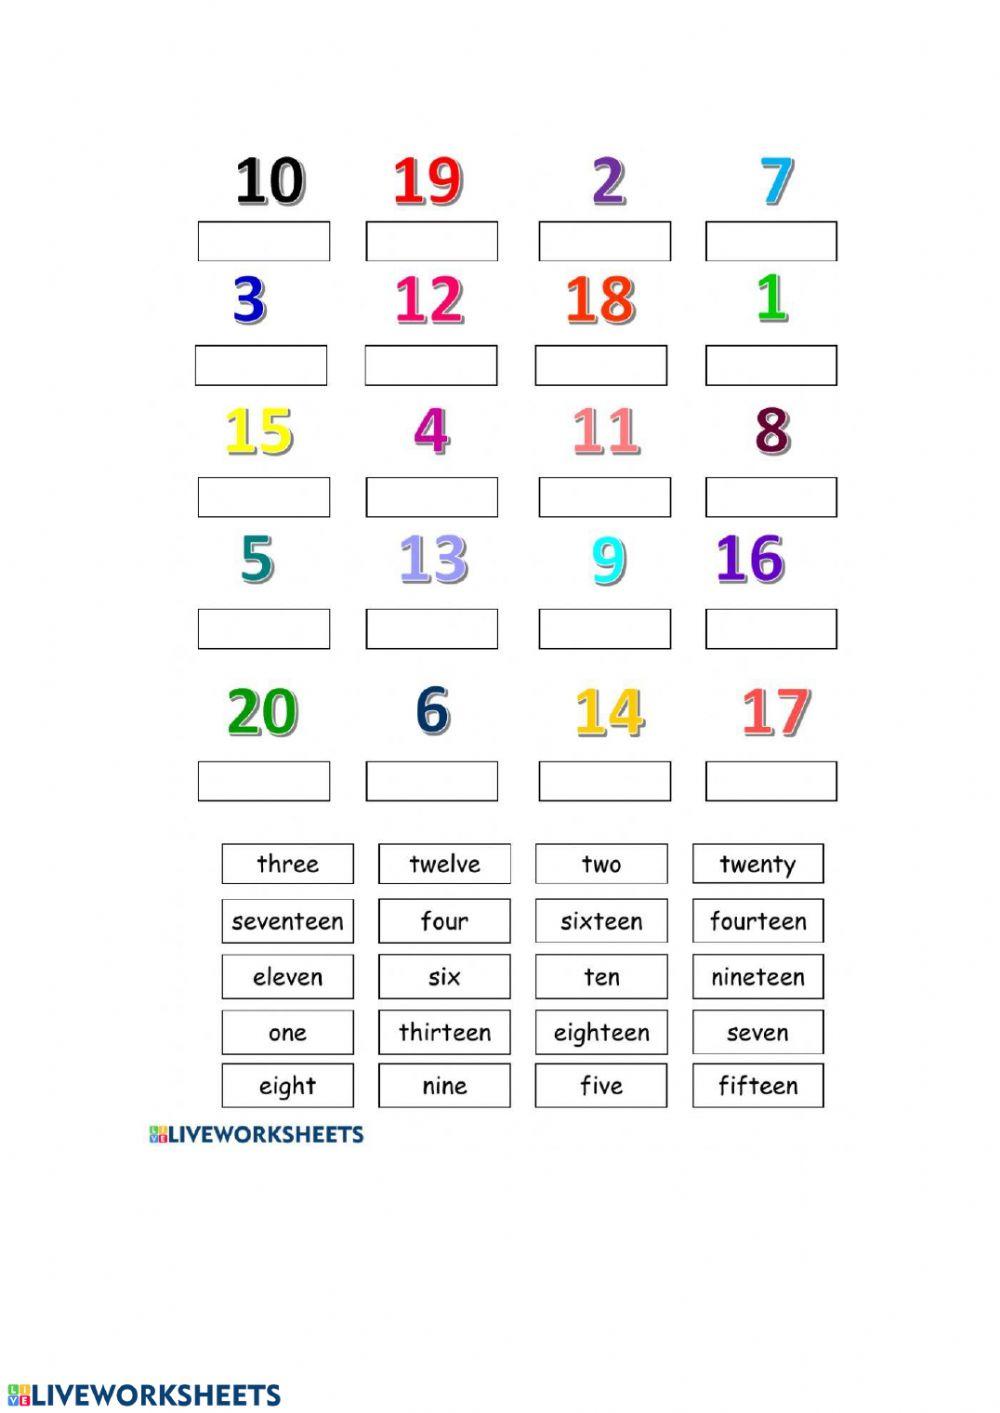 Numbers 1-20 online pdf exercise | Live Worksheets